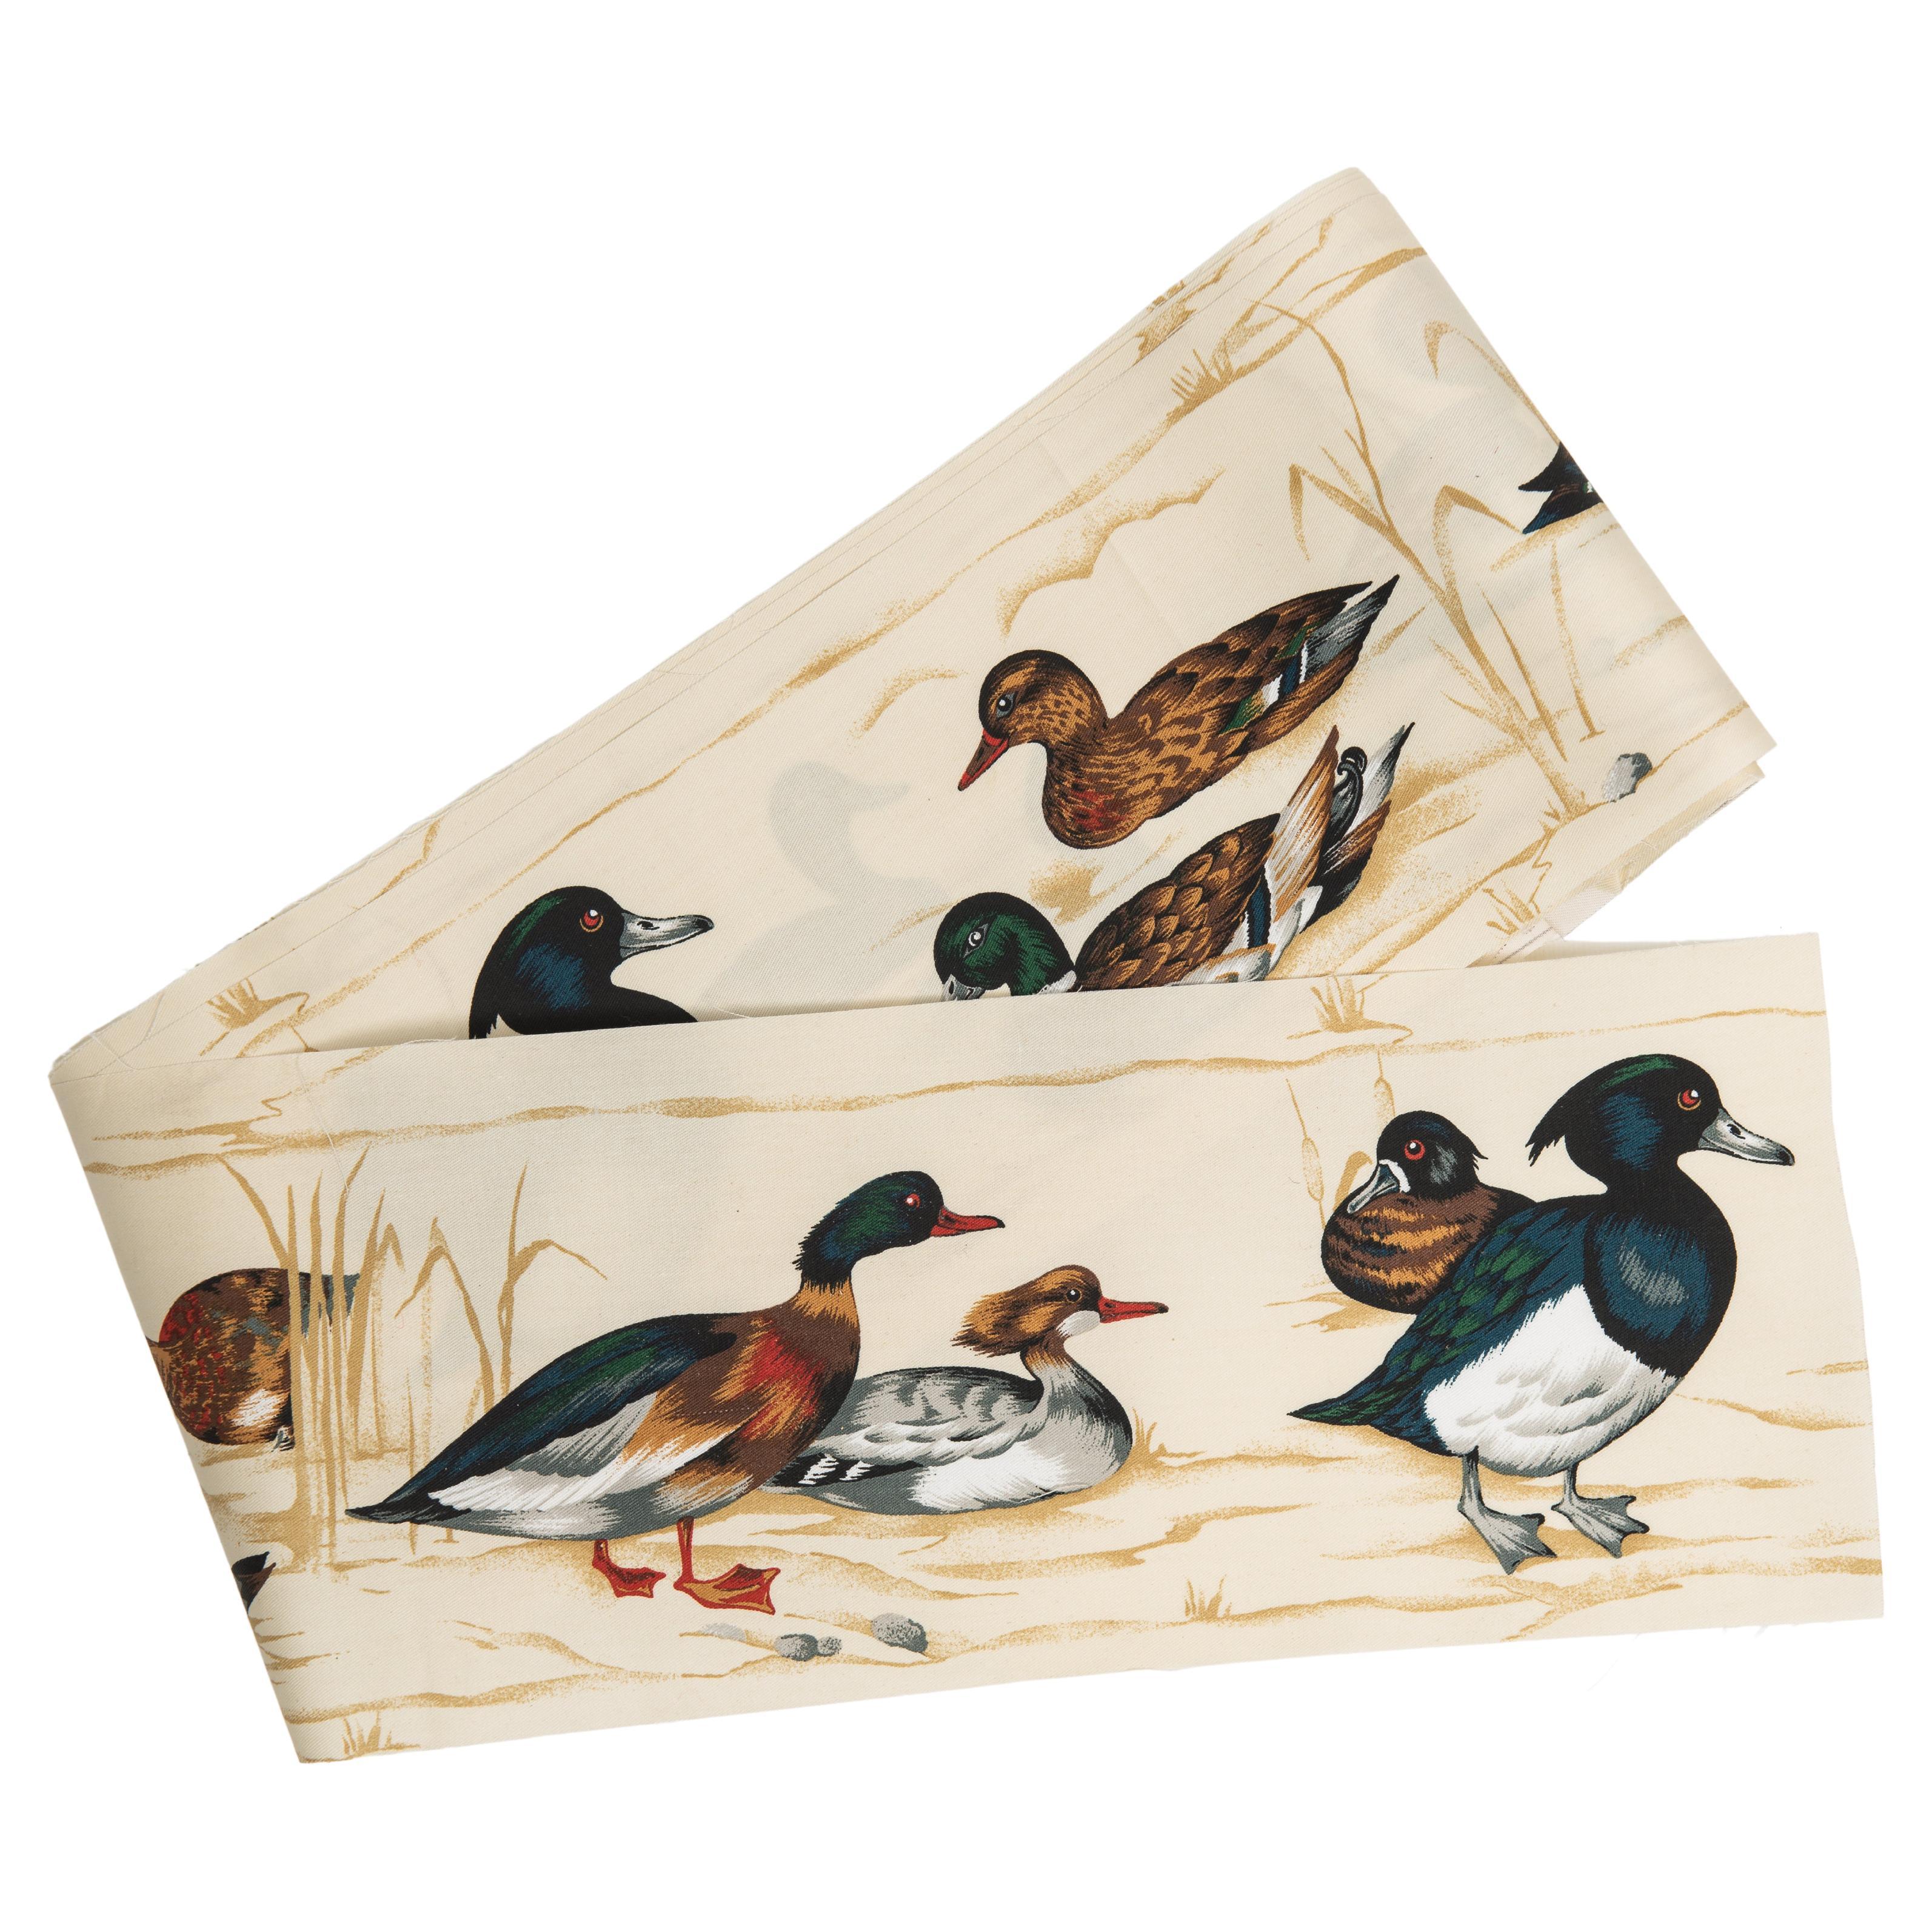 Border with Ducks for Curtains or Table, Covers For Sale